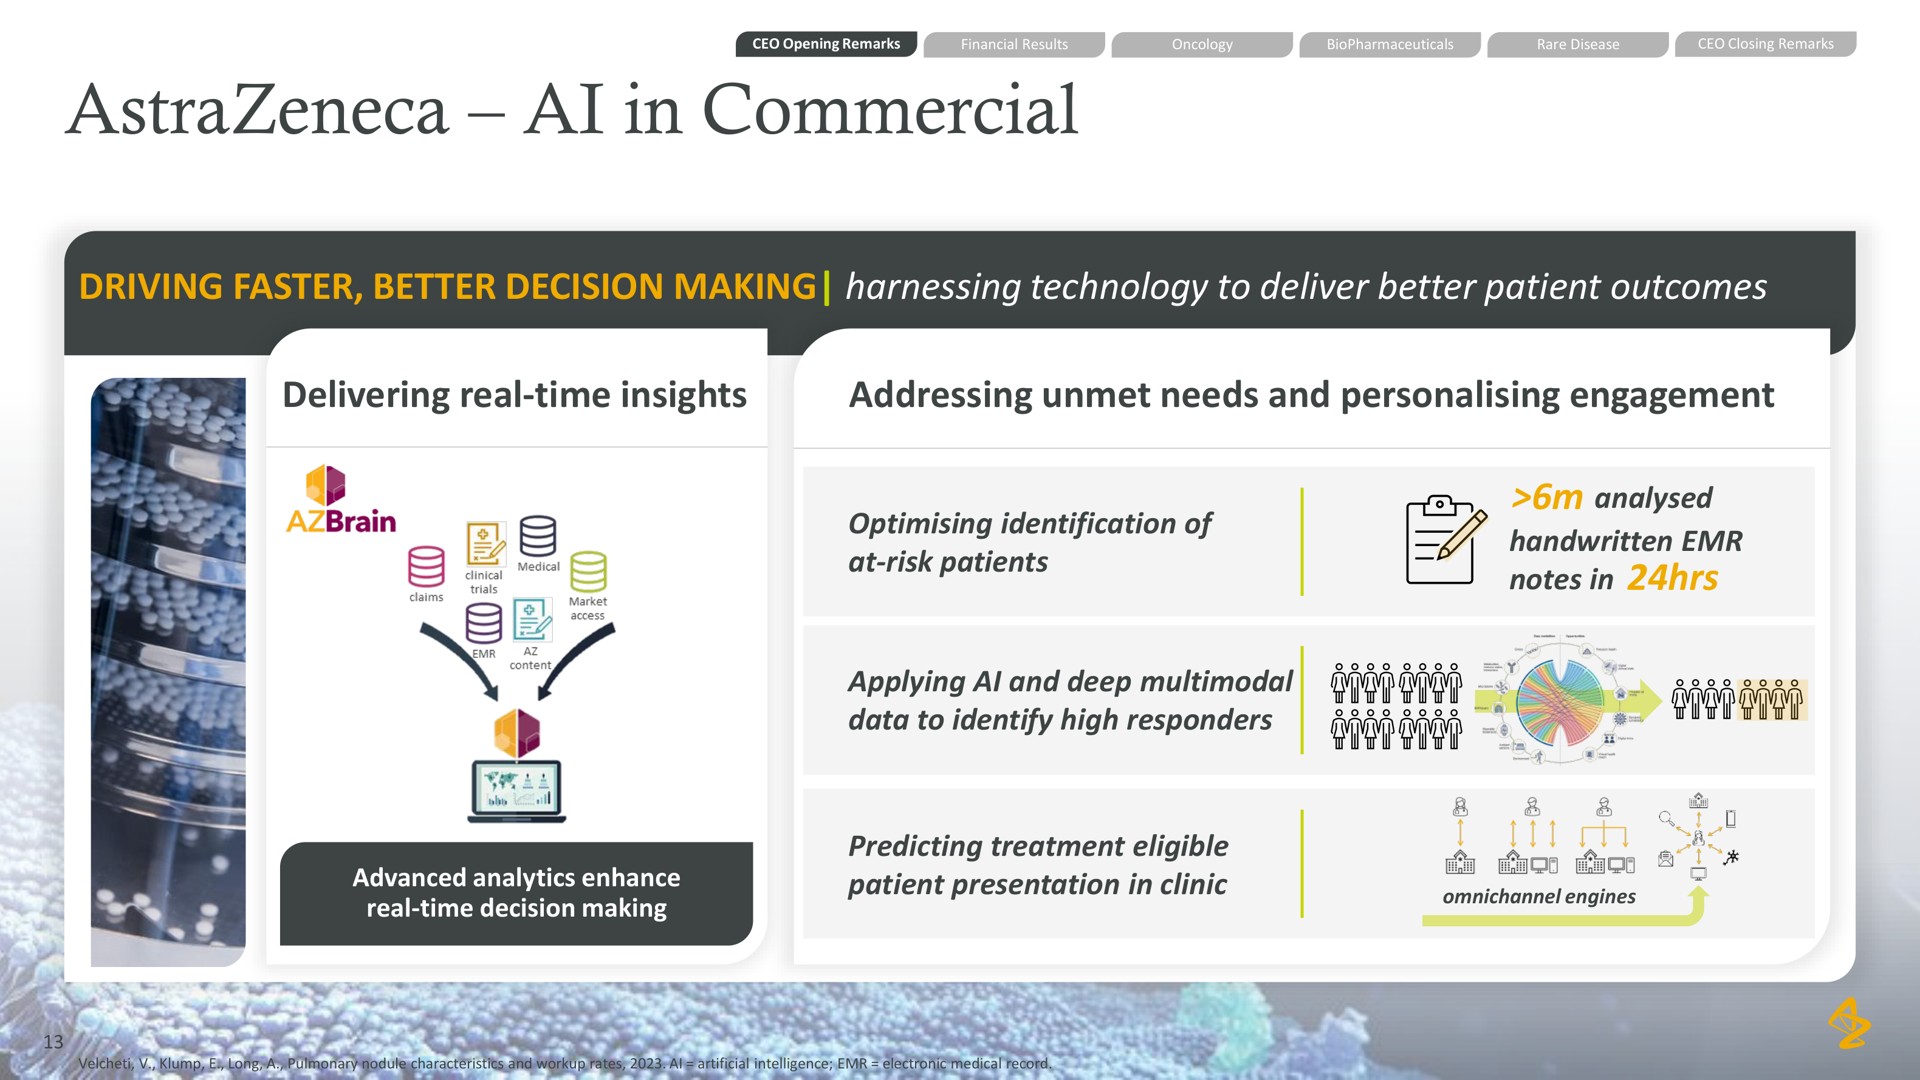 in commercial driving faster better decision making harnessing technology to deliver better patient outcomes delivering real time insights addressing unmet needs and engagement identification of at risk patients applying and deep multimodal data to identify high responders analysed notes in predicting treatment eligible patient presentation in clinic | AstraZeneca